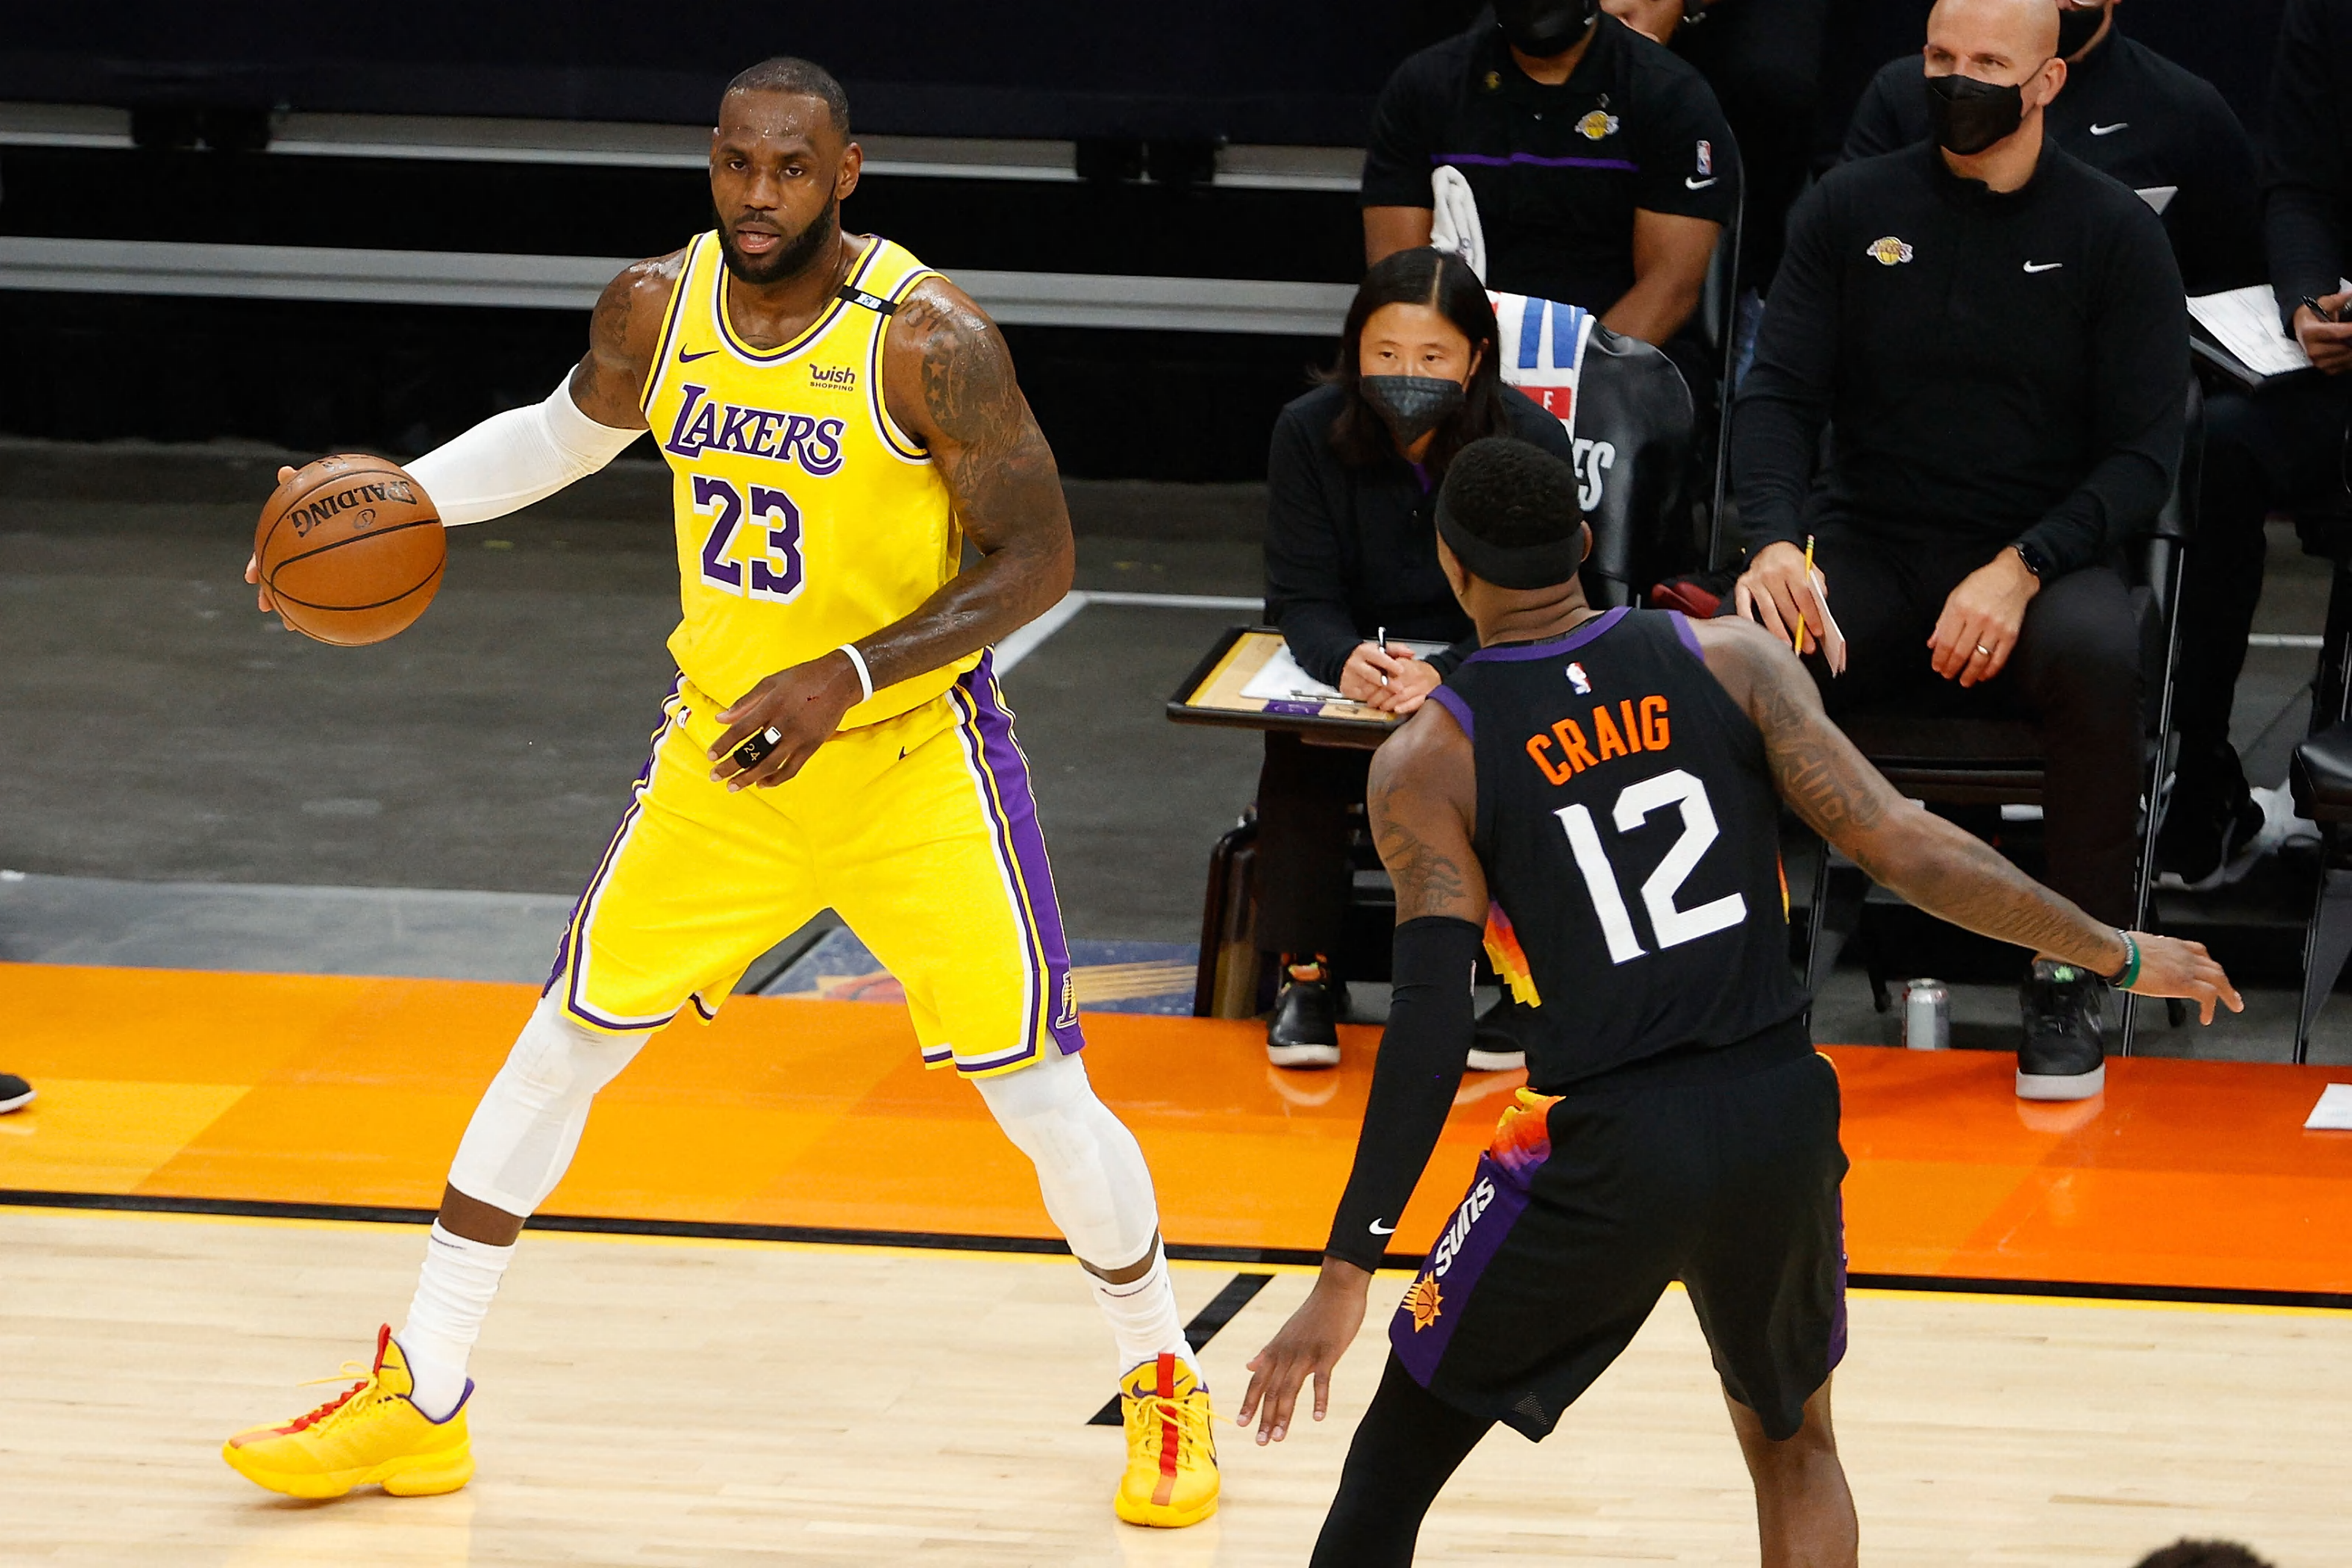 The shoes worn by Los Angeles Lakers forward LeBron James (23) are seen  during the first quarter against the New York Knicks at Staples Center.